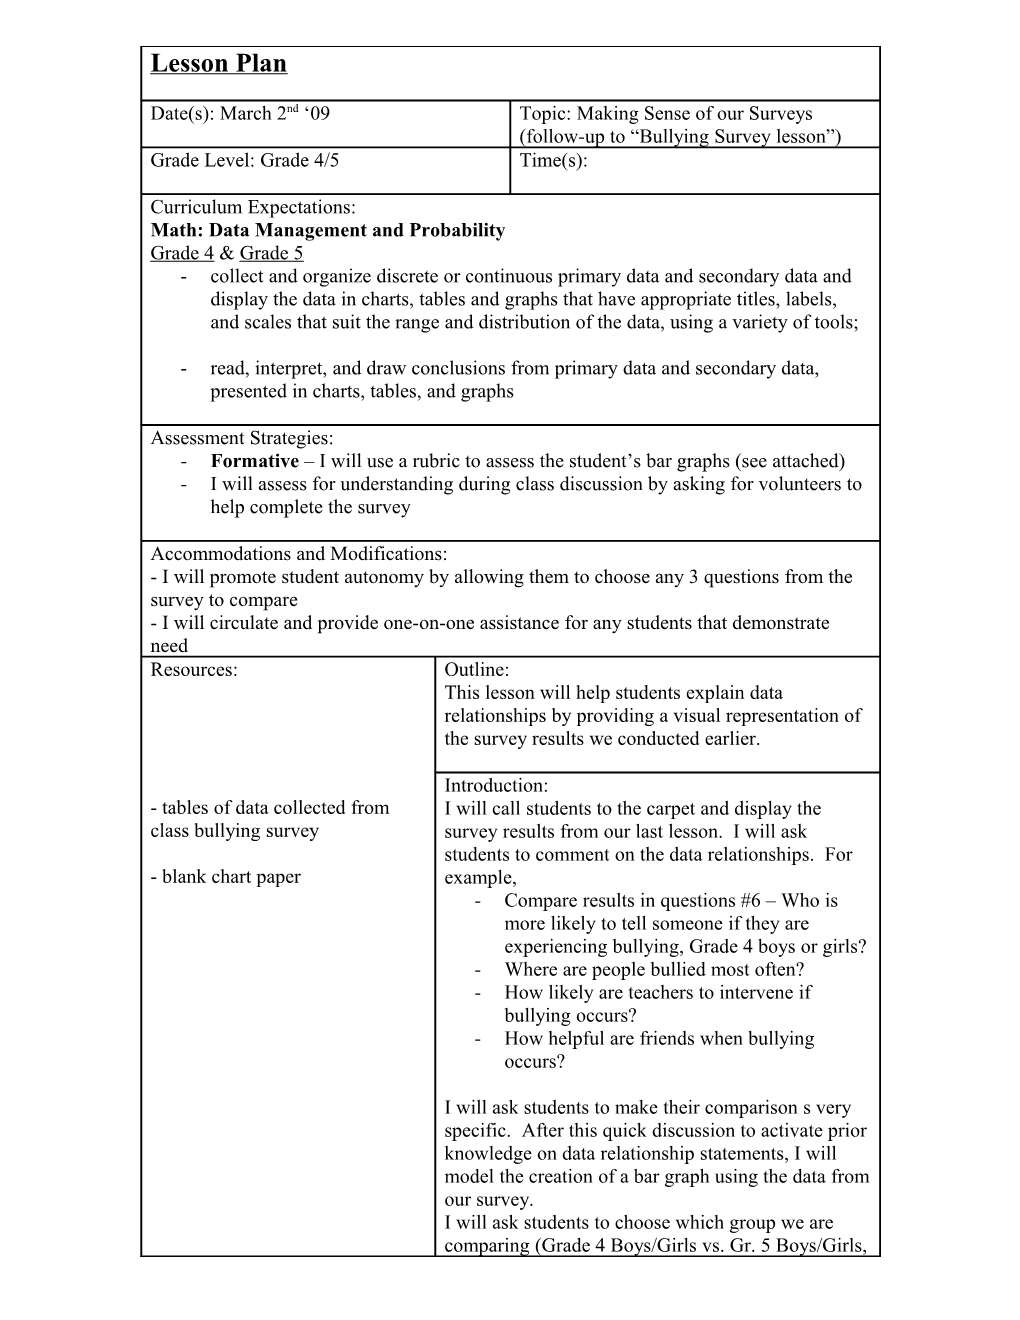 Rubric for Bar Graphs on Bullying Survey Results